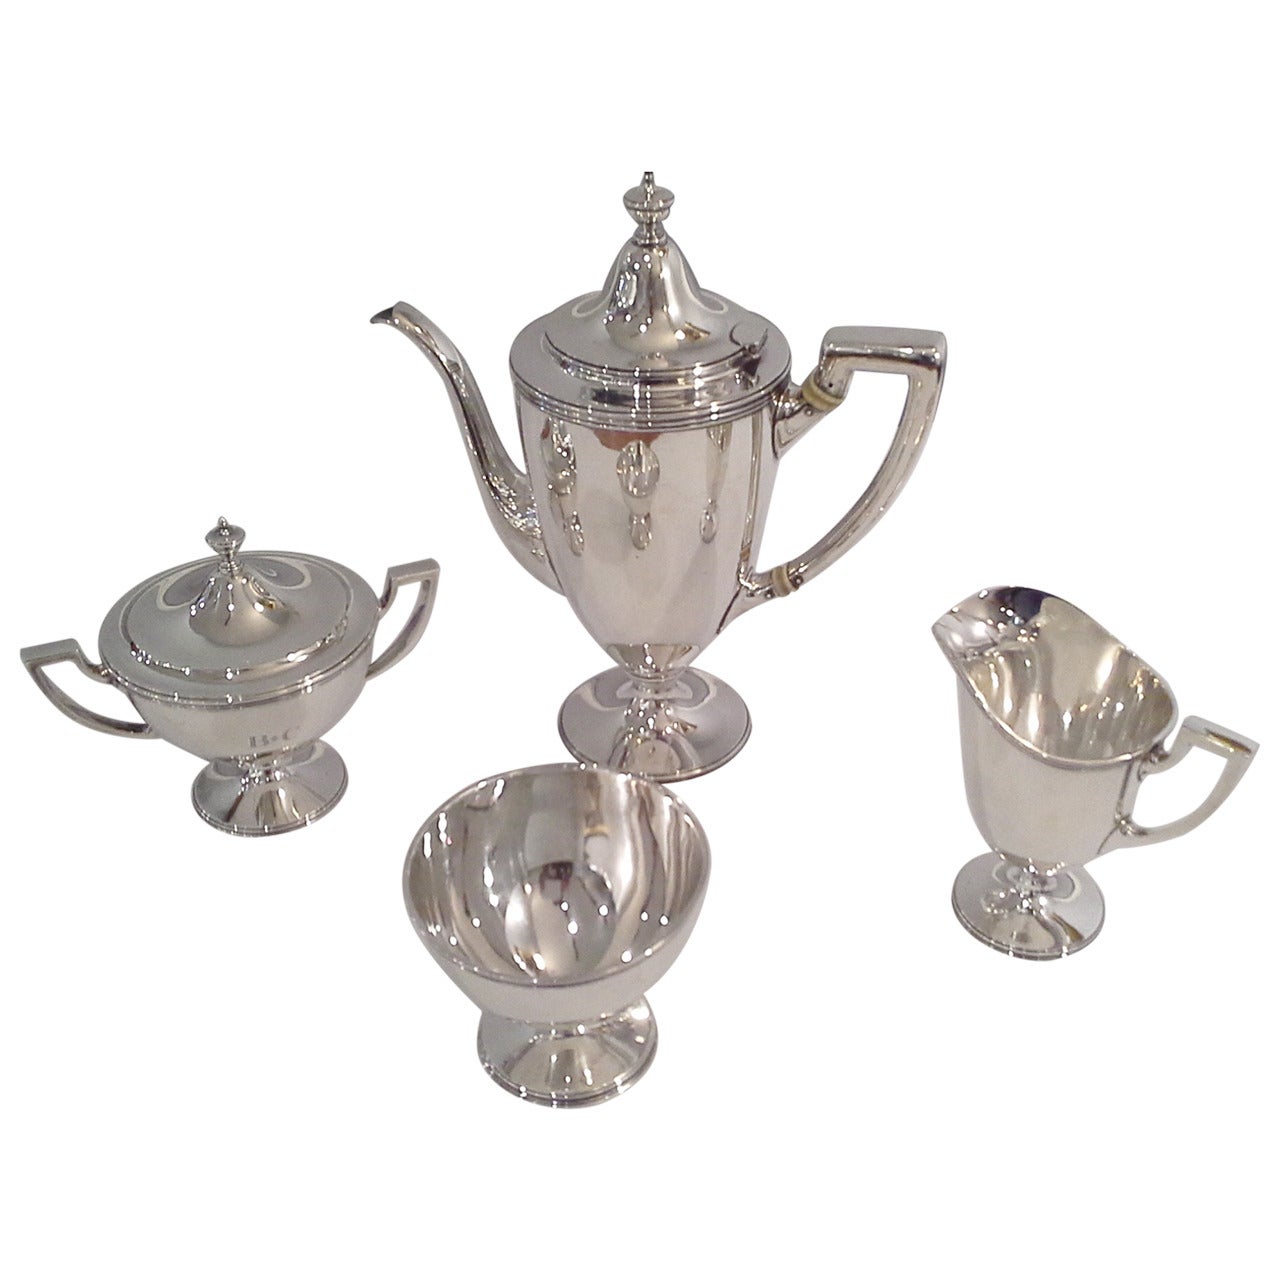 Tiffany & Co. Makers Sterling Silver Tea or Coffee Service with Four Pieces